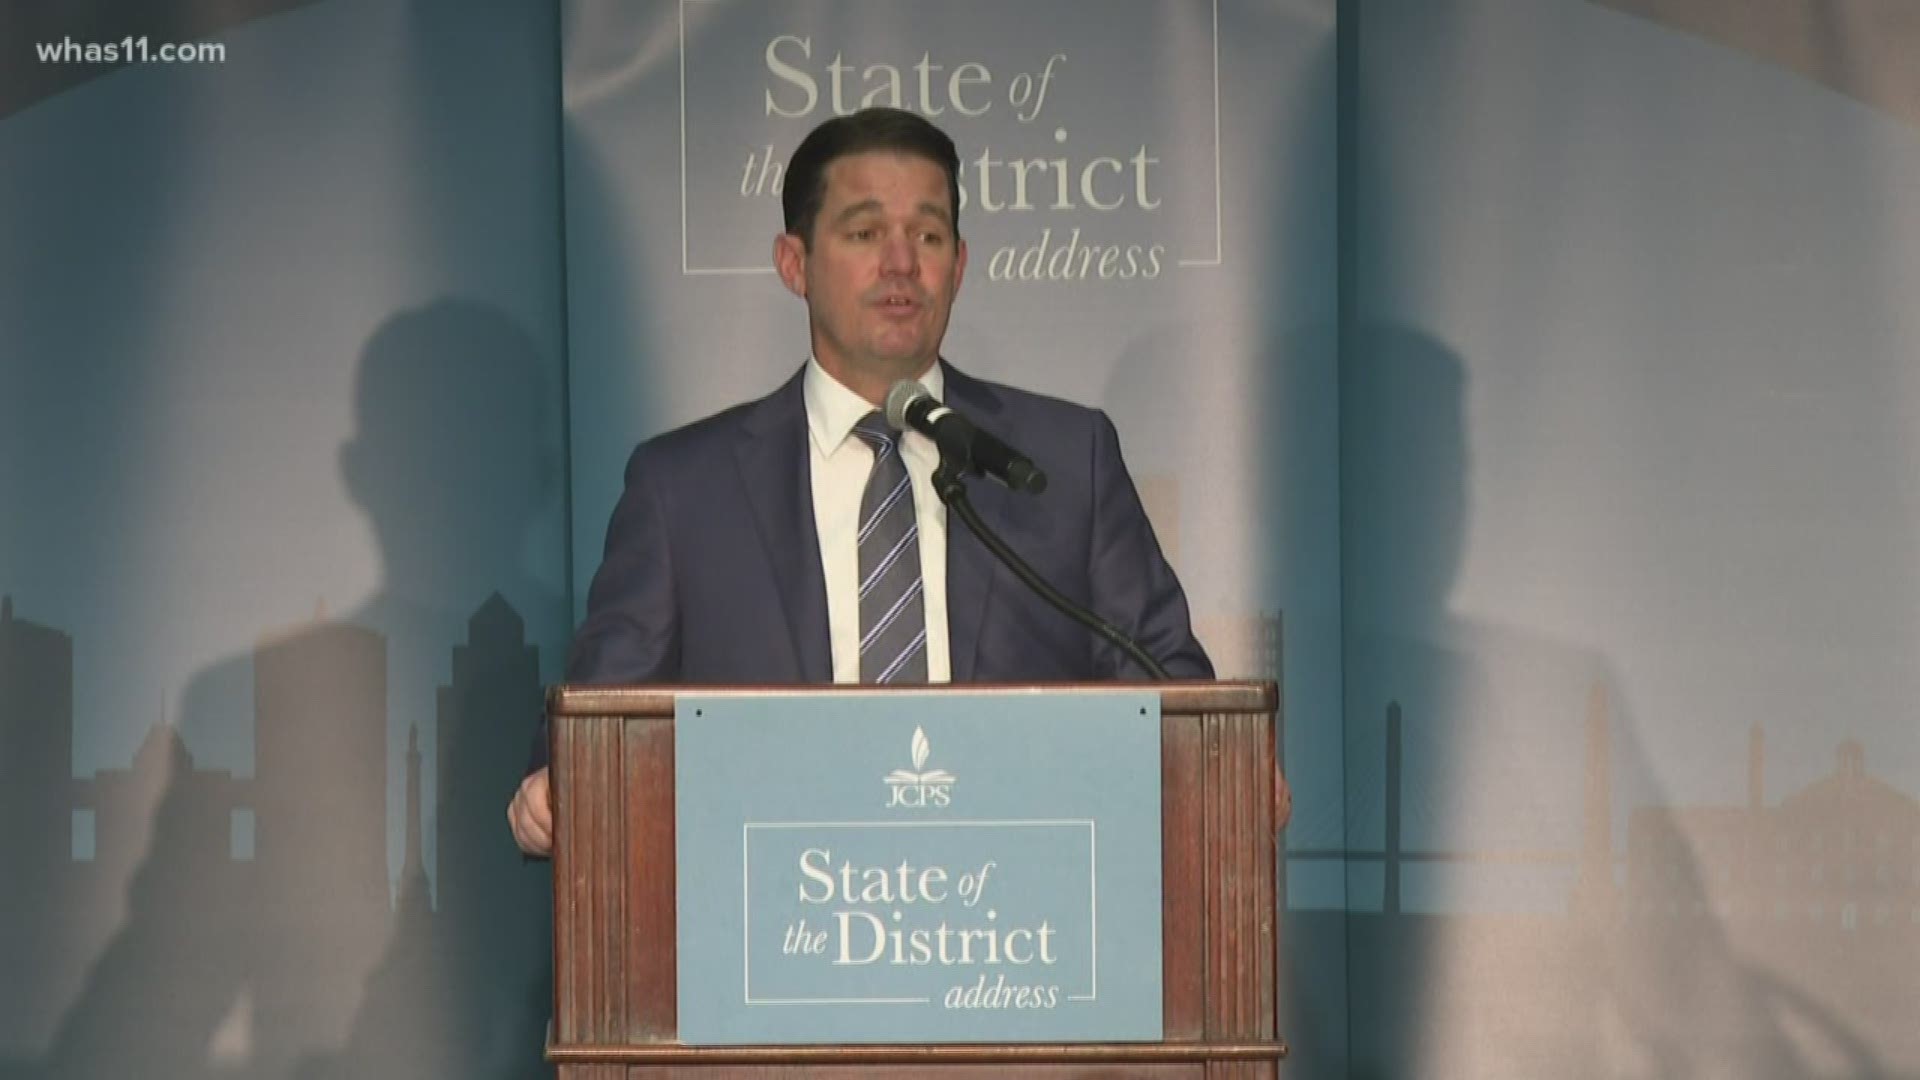 JCPS Superintendent Dr. Marty Pollio spoke openly about the challenges the district faces during his second State of the District address